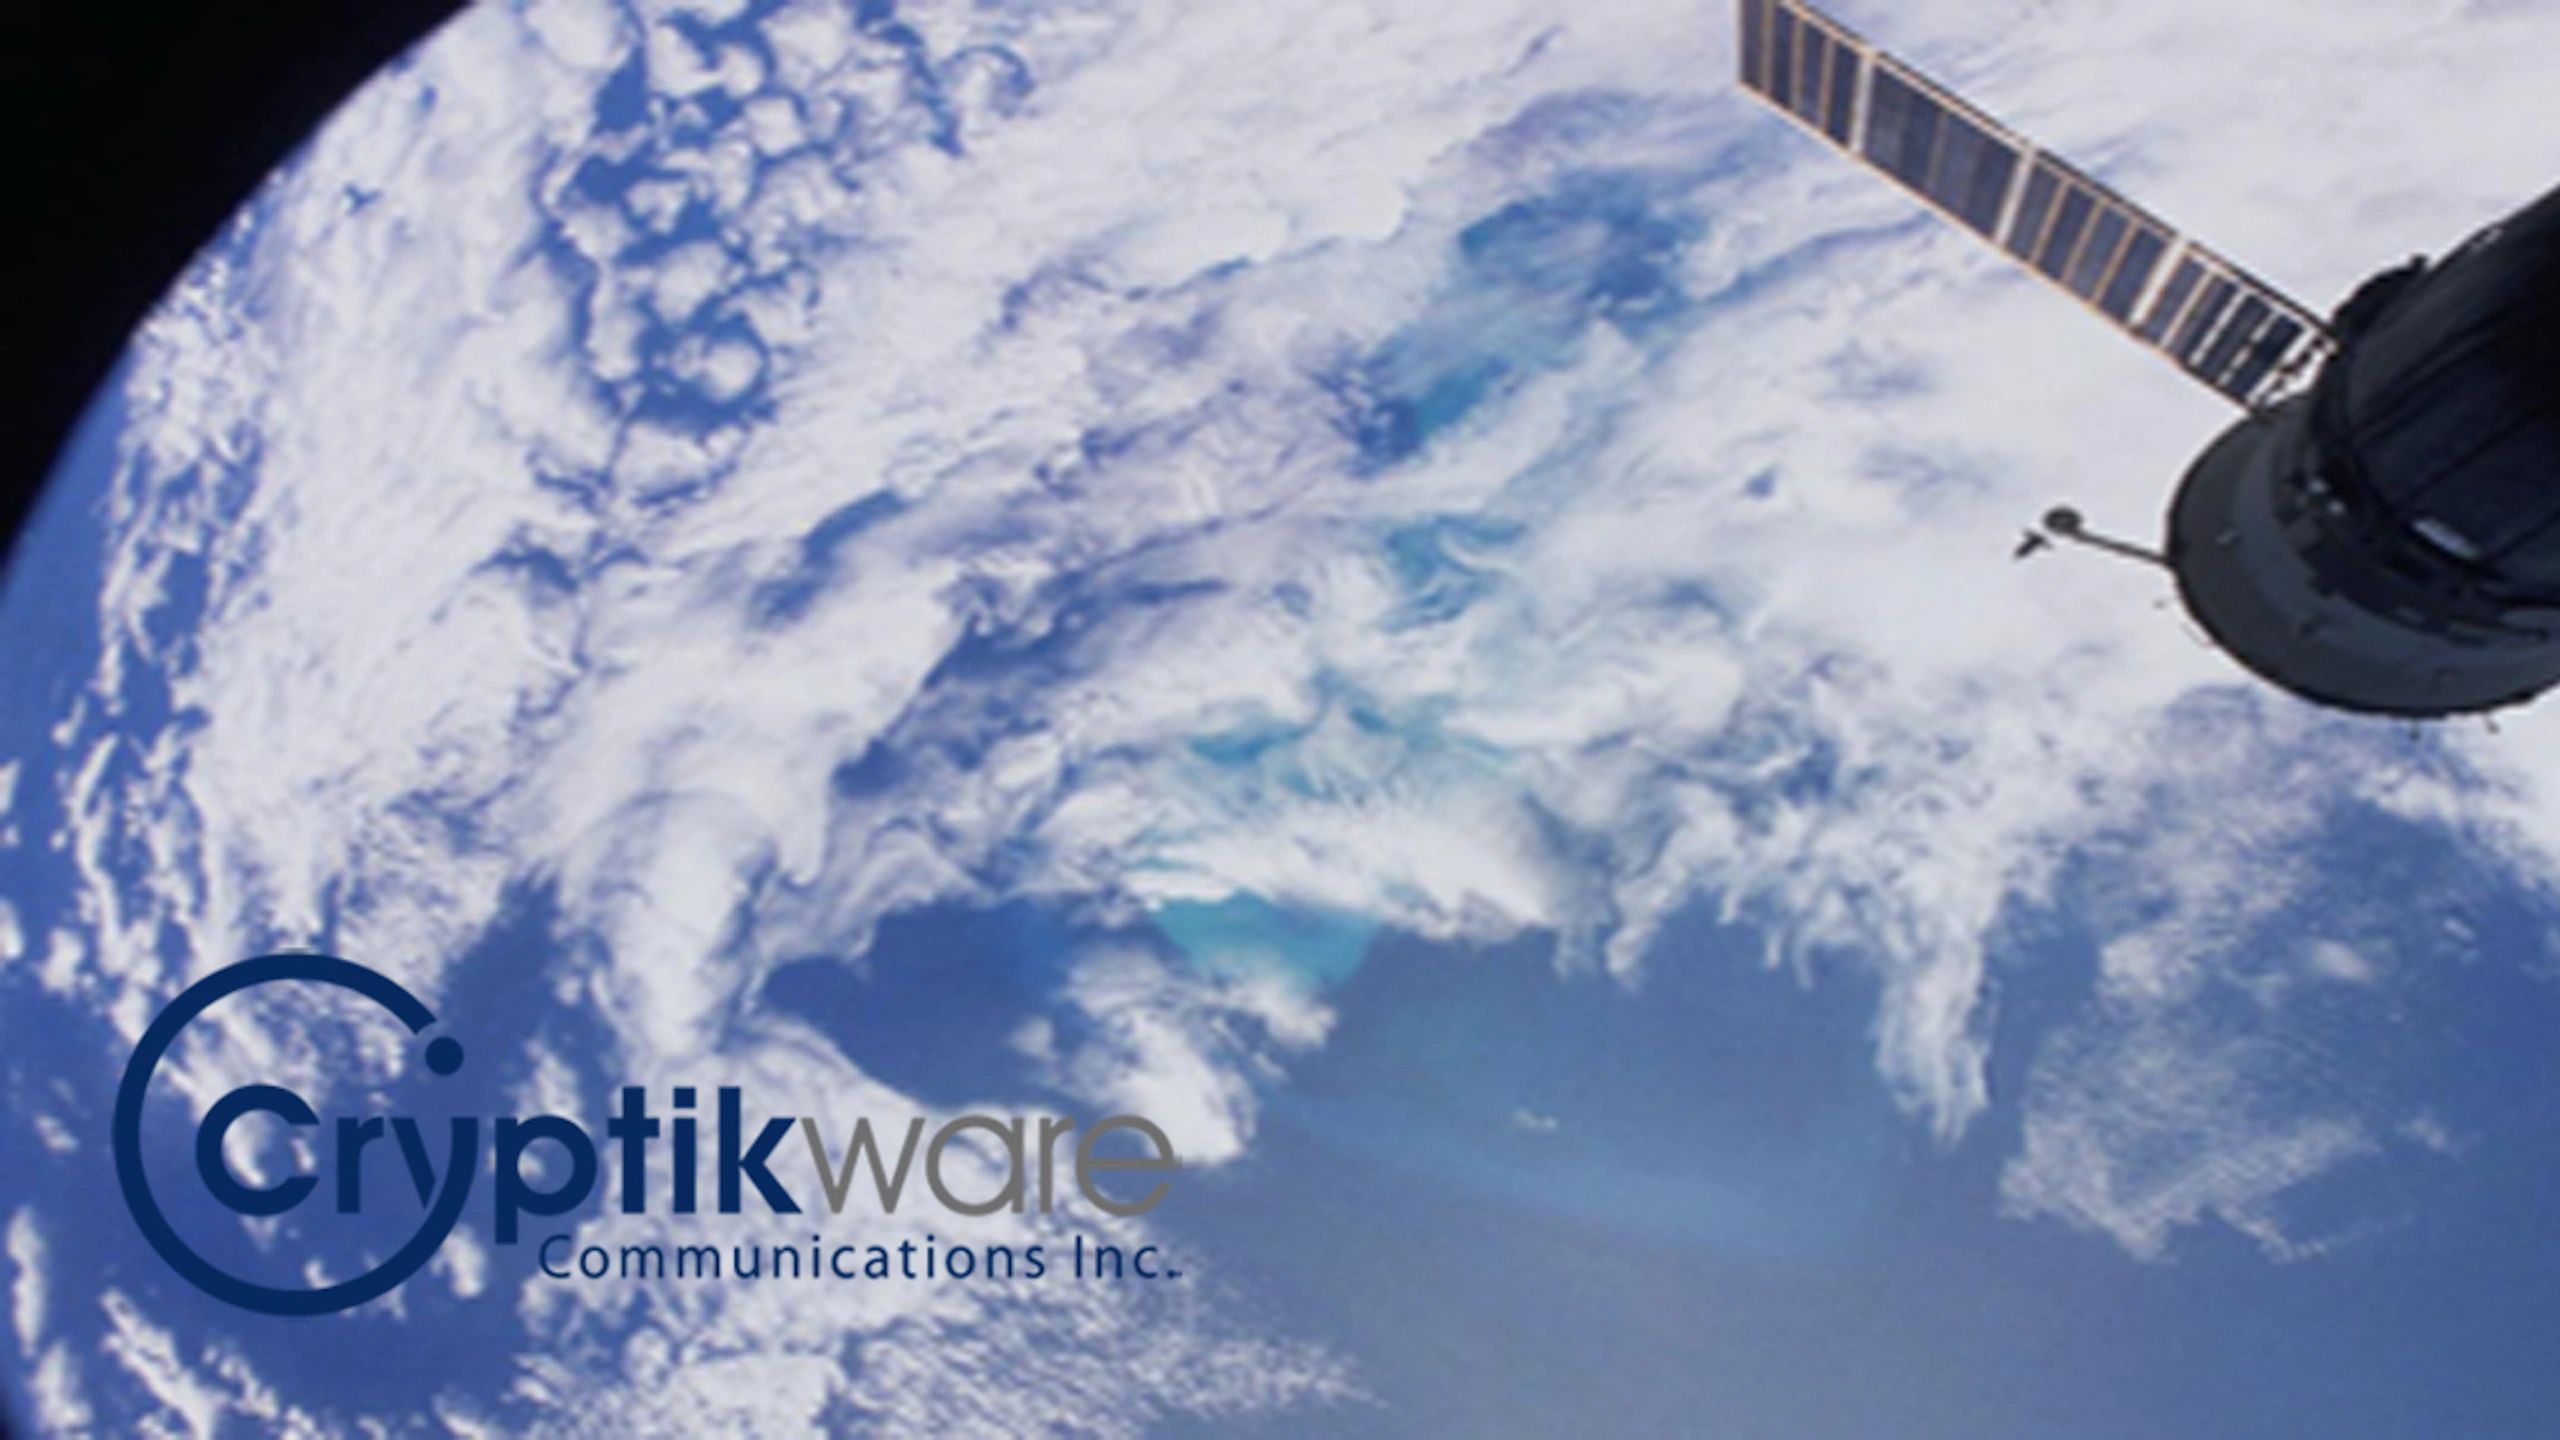 Cryptikware Communications